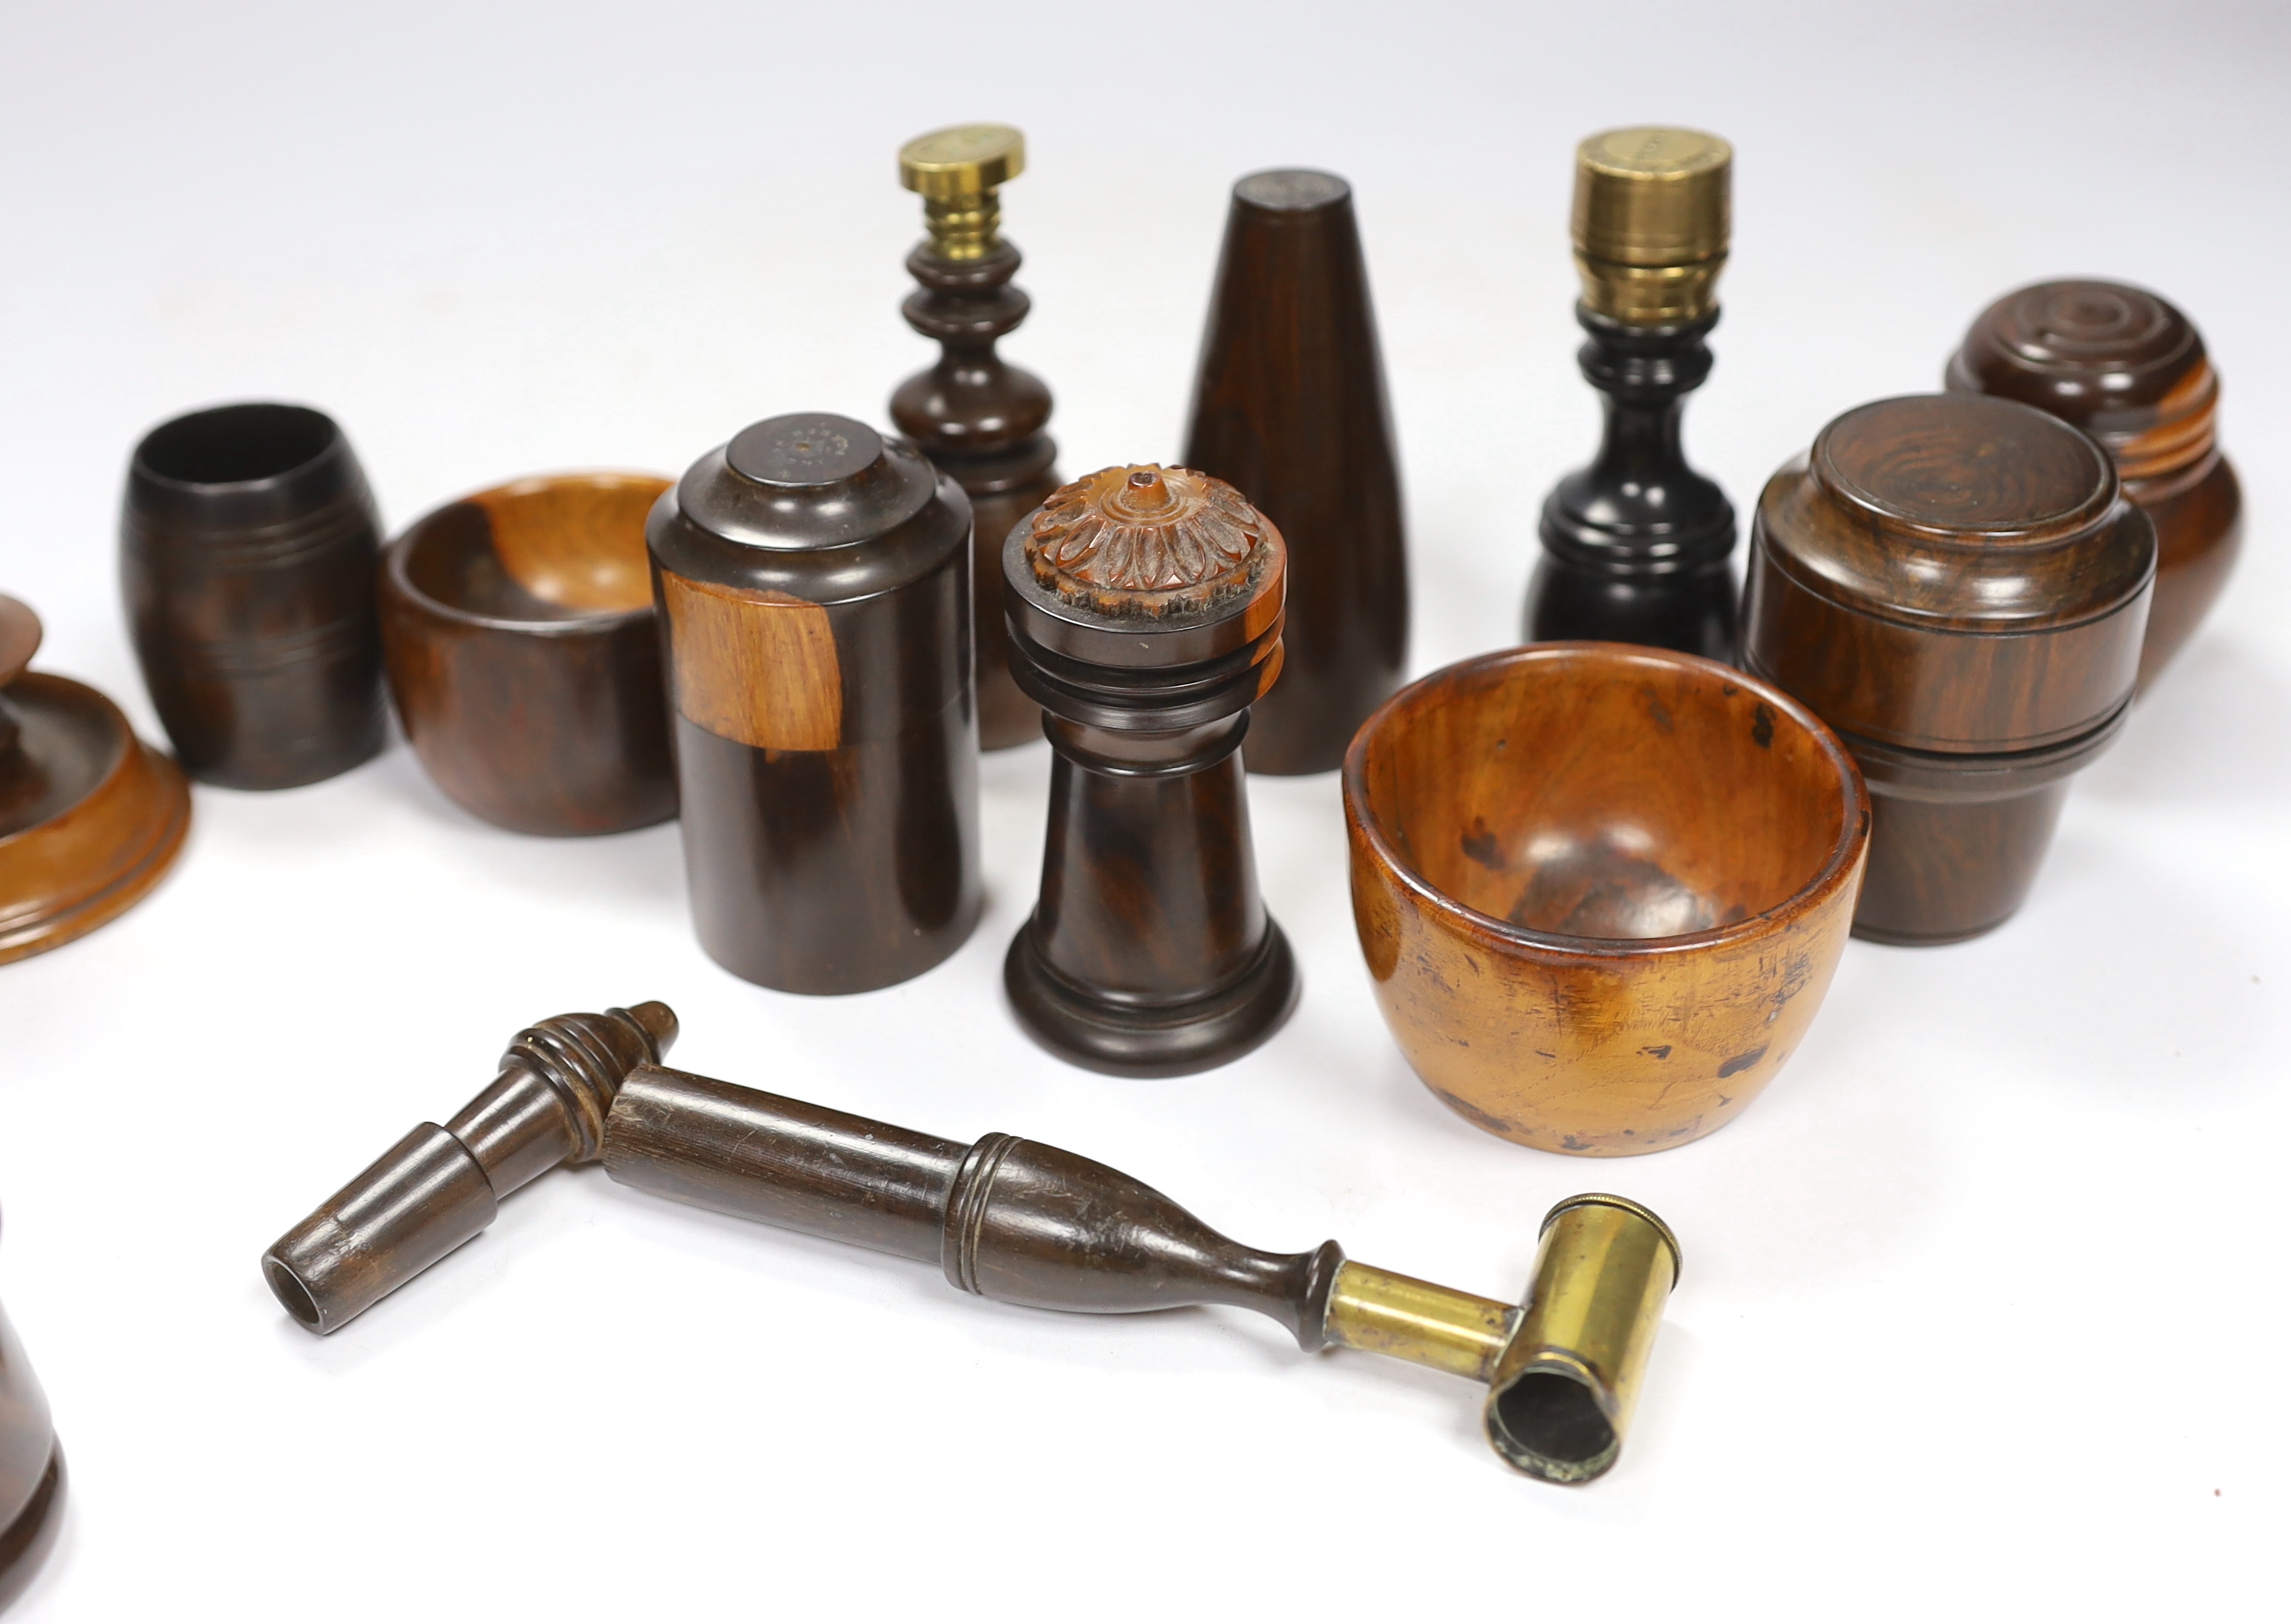 A collection of 19th/20th century lignum vitae vessels and desk items, to include a pepper pot, salt pot, two desk seals, a whistle, a candlestick etc.